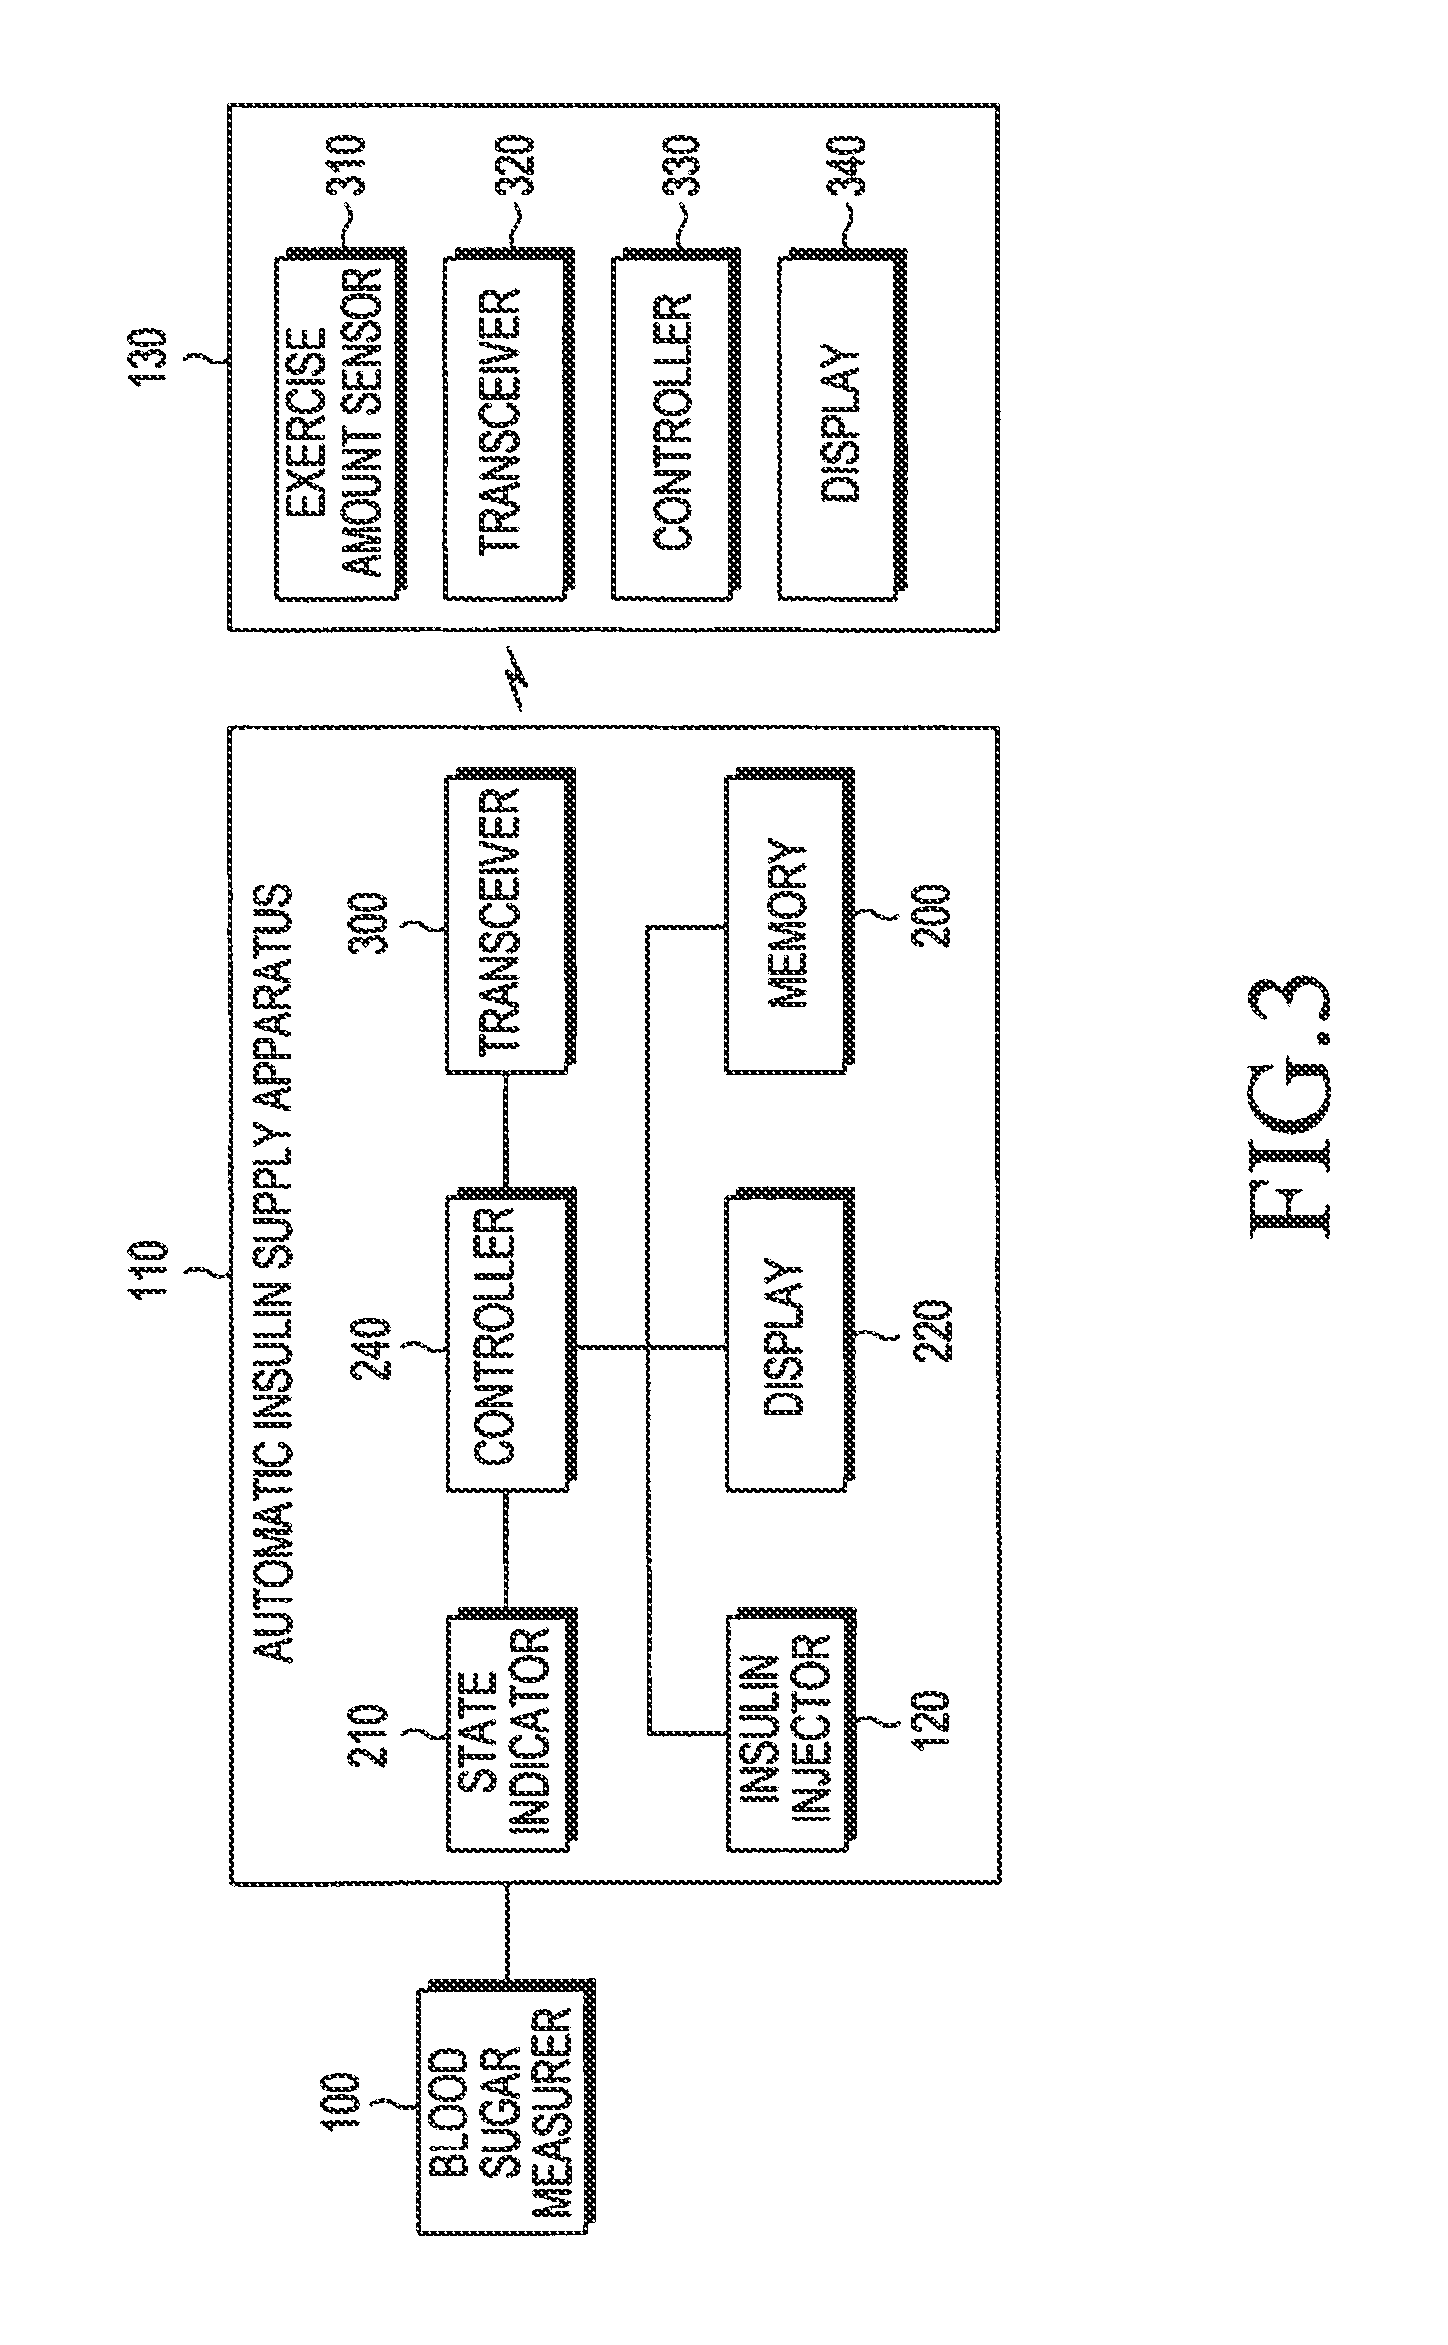 Apparatus and method for automatically supplying insulin based on amount of exercise